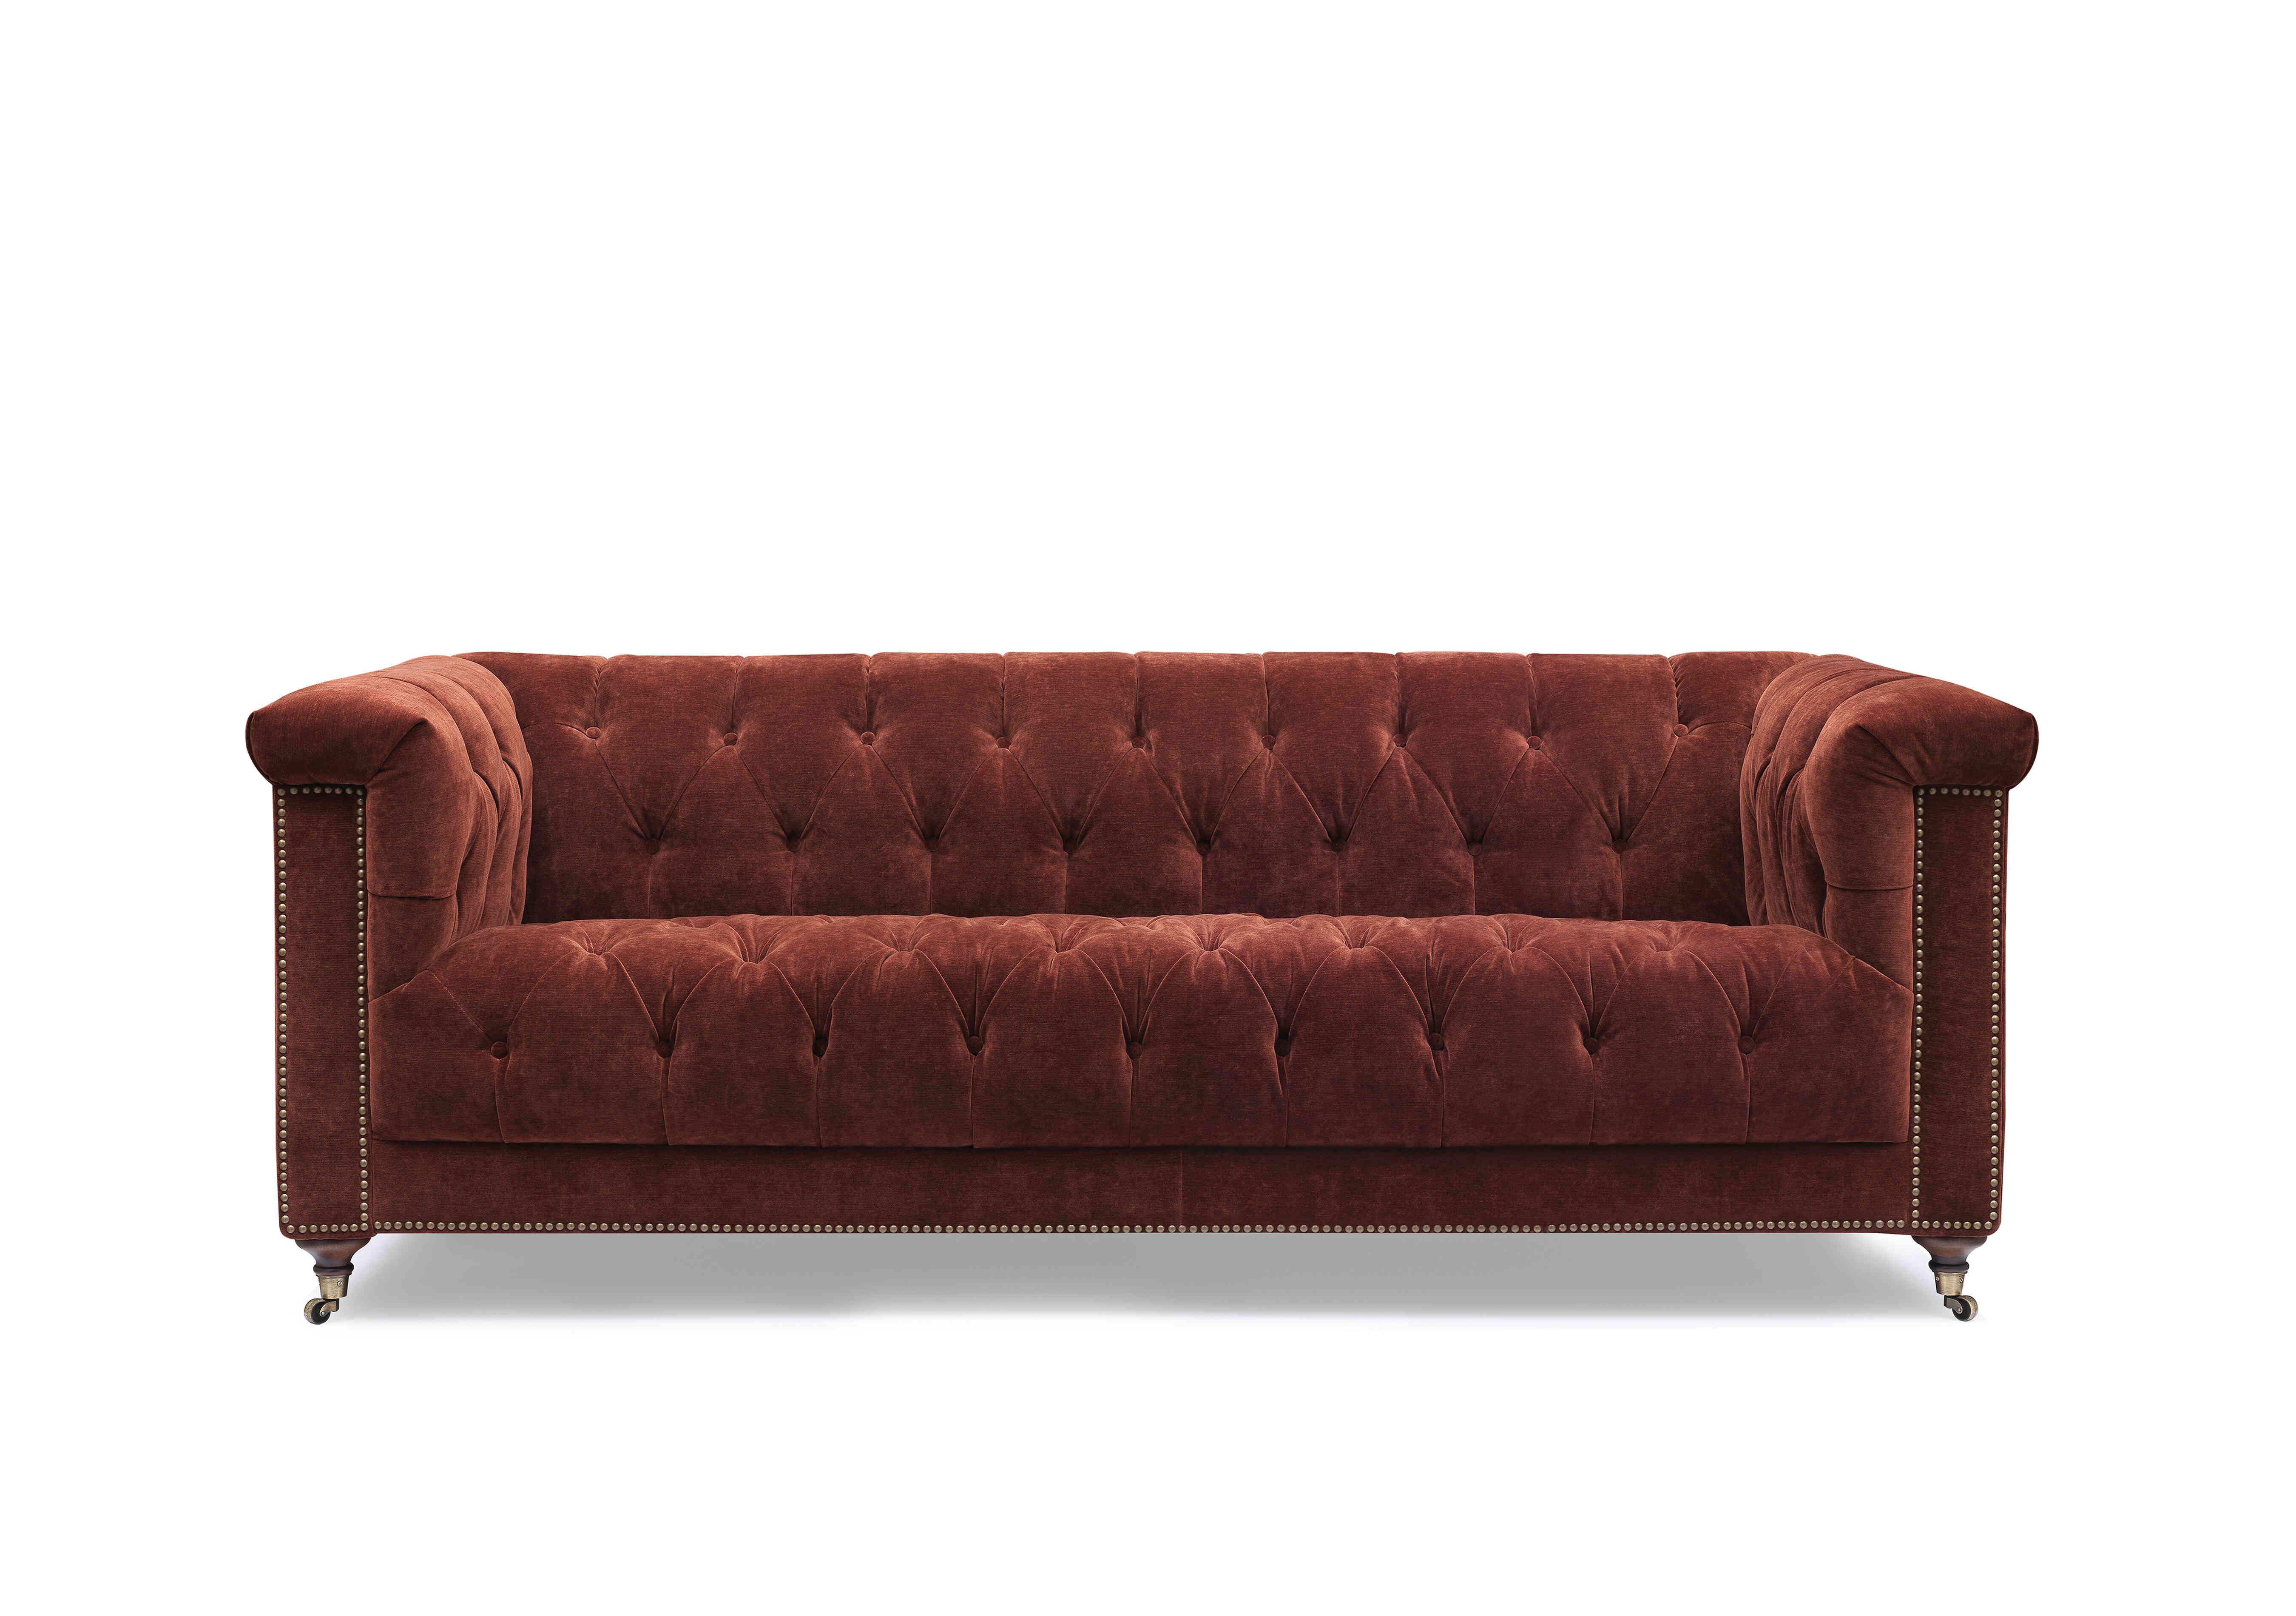 Wallace 3 Seater Fabric Chesterfield Sofa with USB-C in X3y1-W019 Tawny on Furniture Village